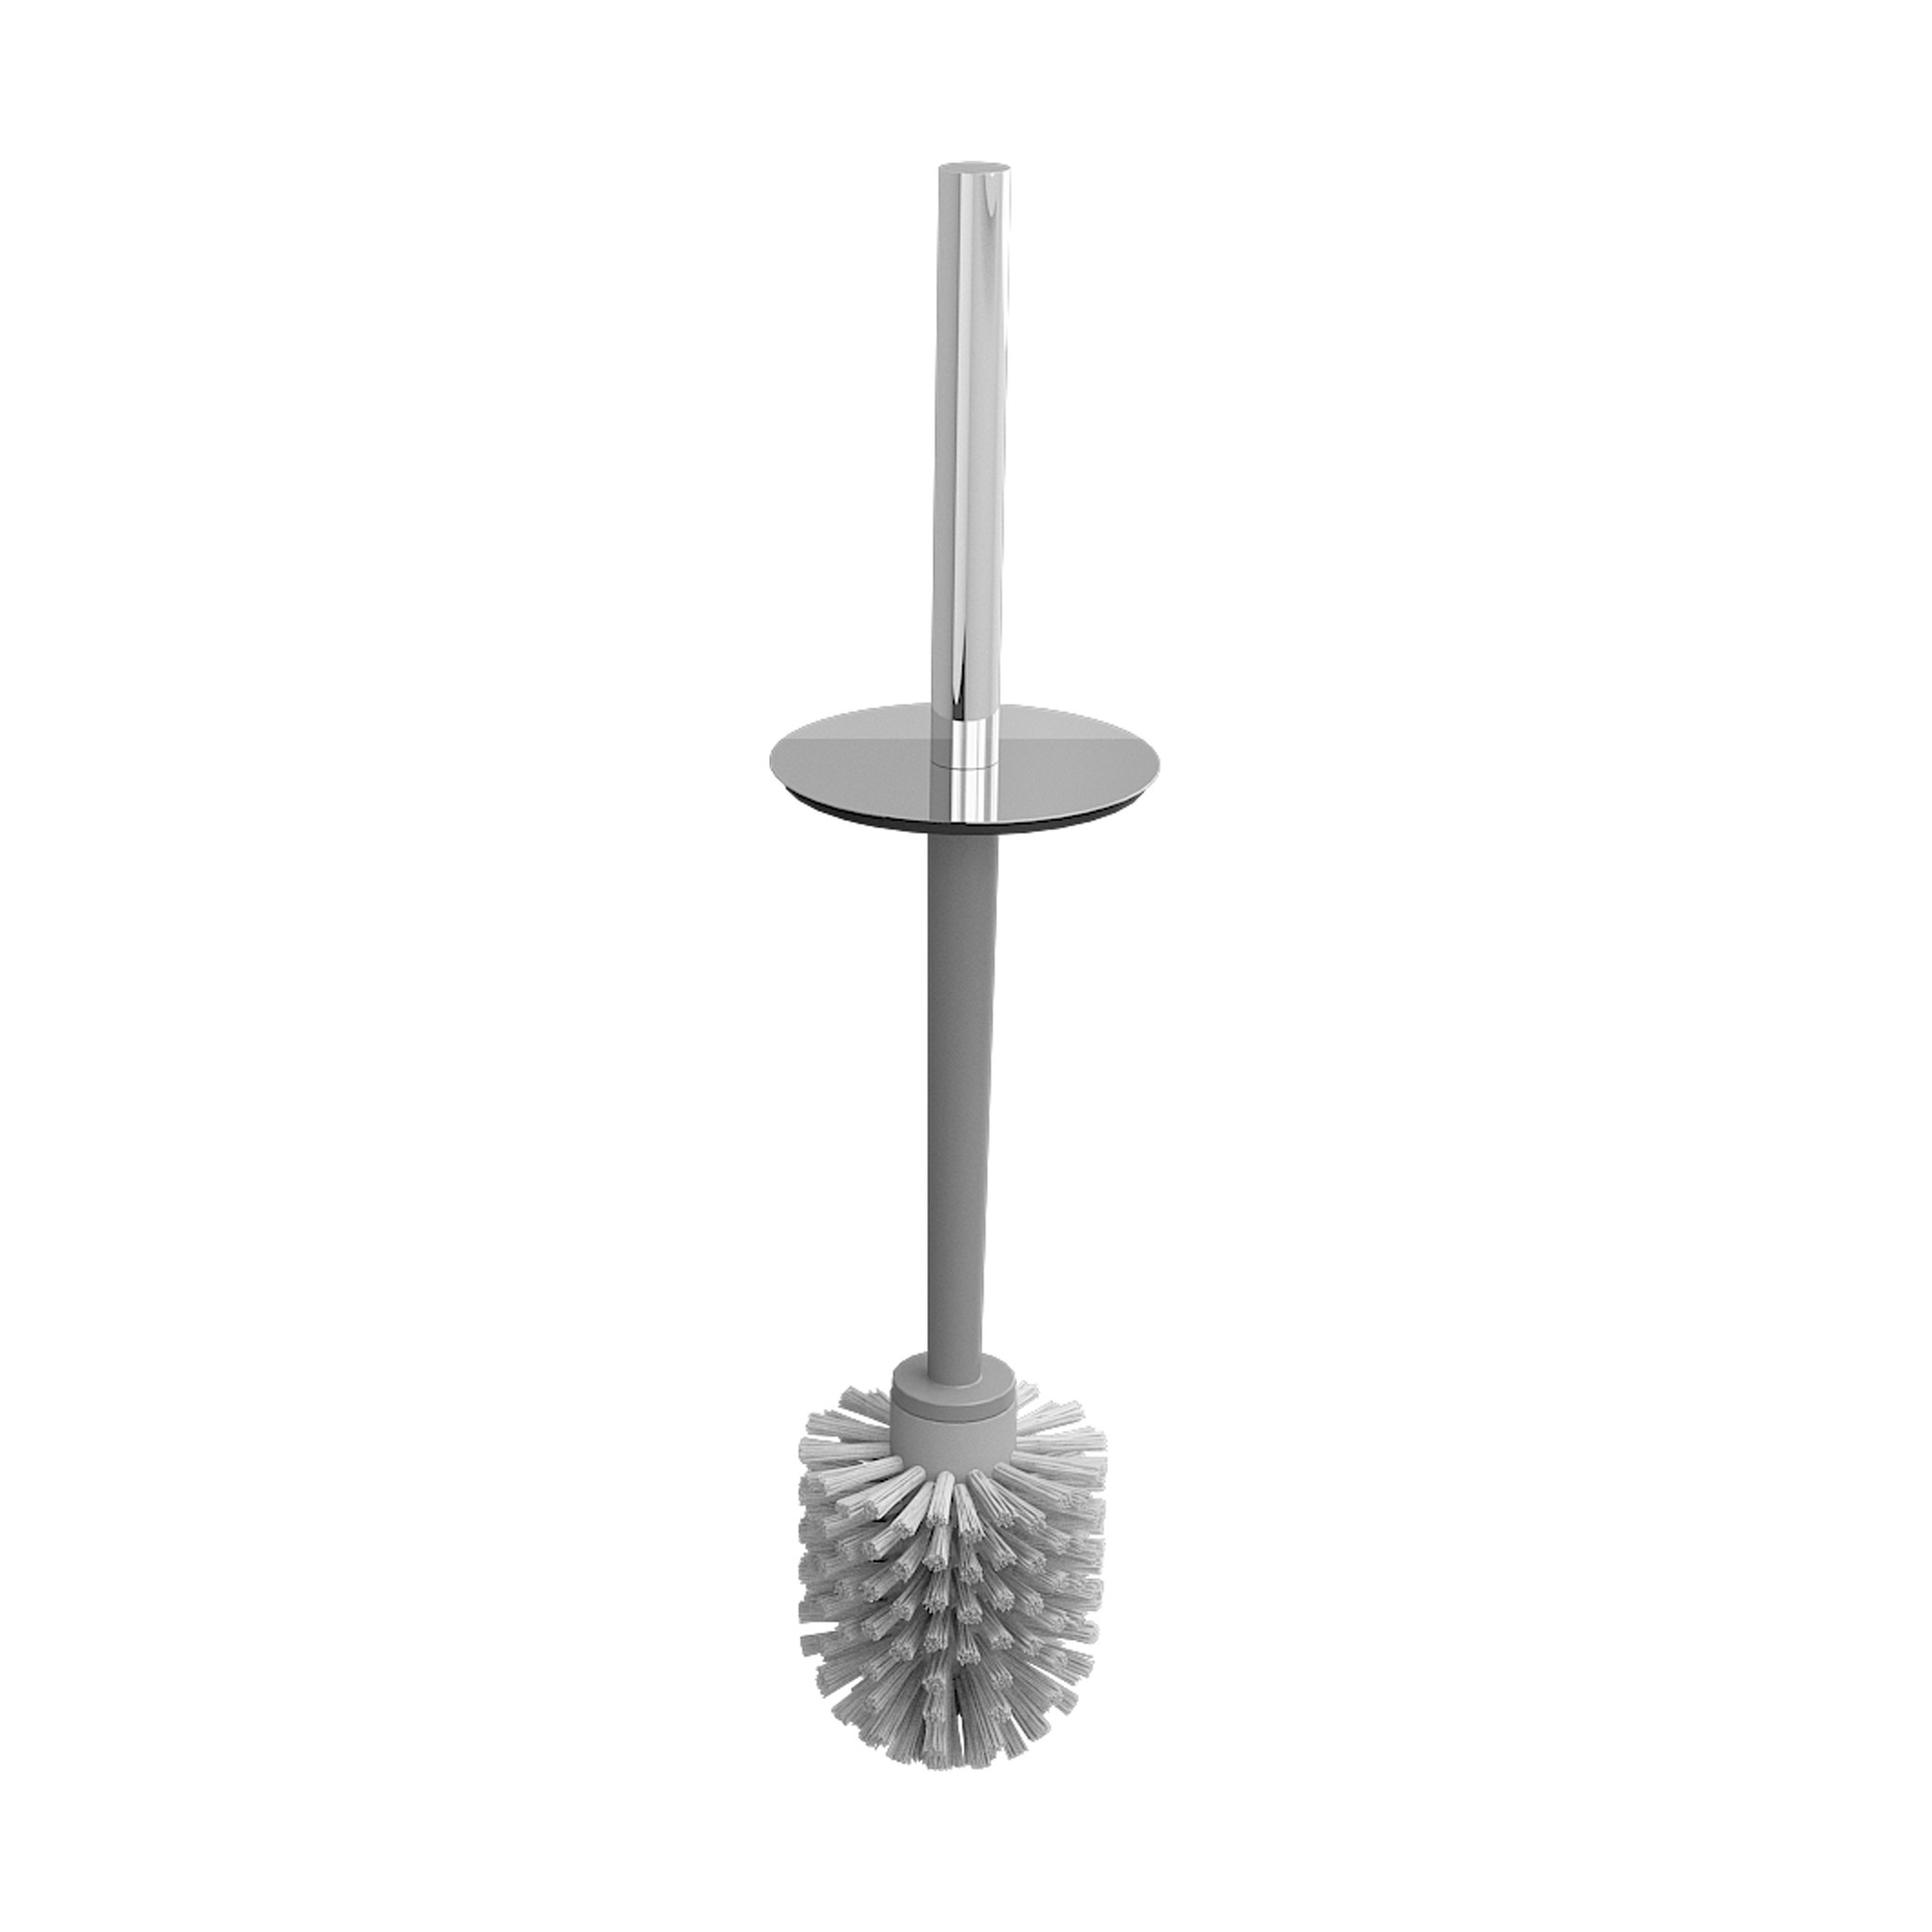 Sjokker spare toilet brush with handle